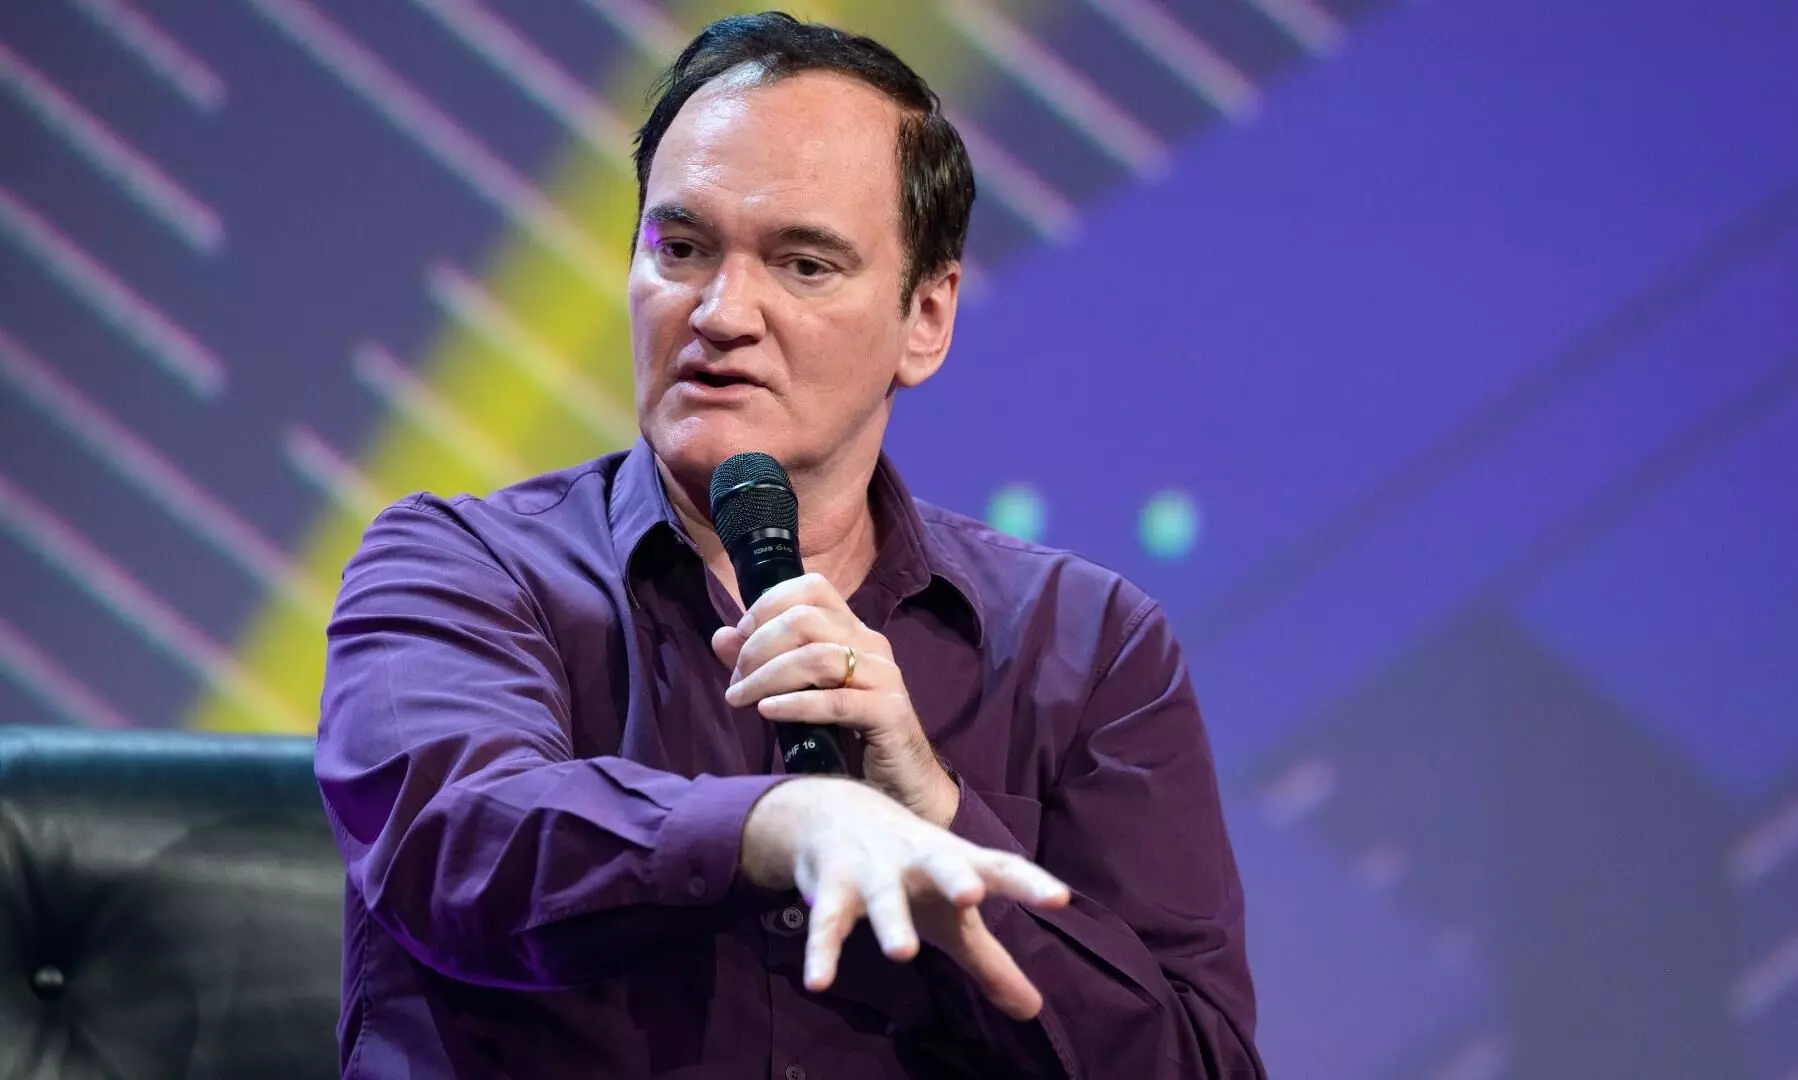 Quentin Tarantino scraps plans to make The Movie Critic as his 10th film